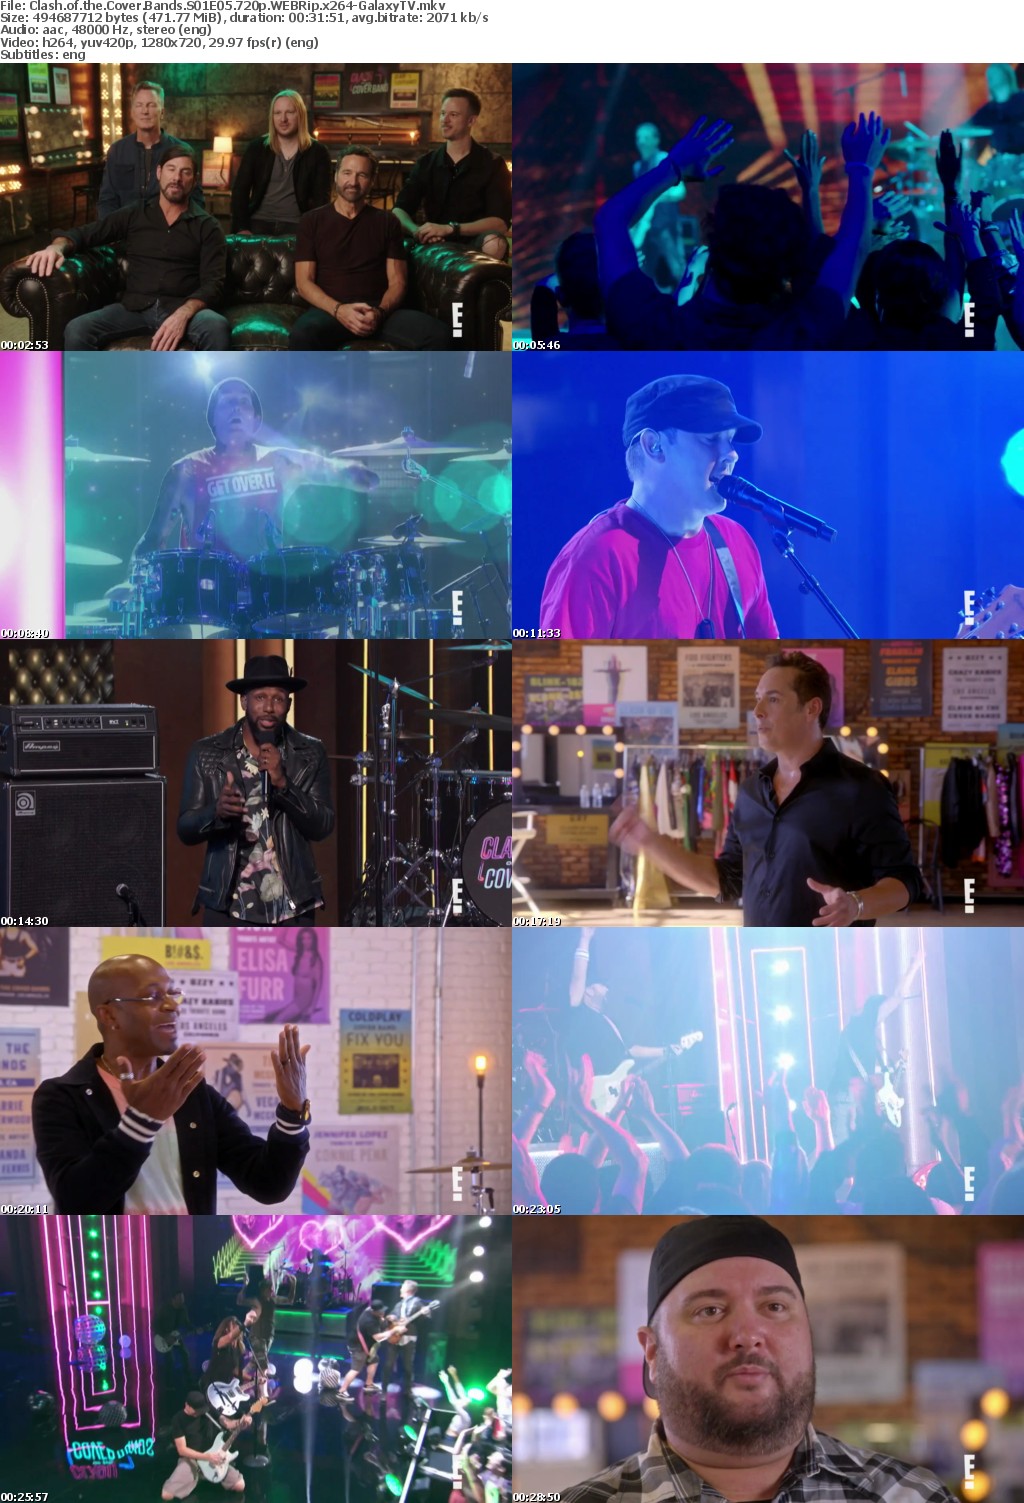 Clash of the Cover Bands S01 COMPLETE 720p WEBRip x264-GalaxyTV